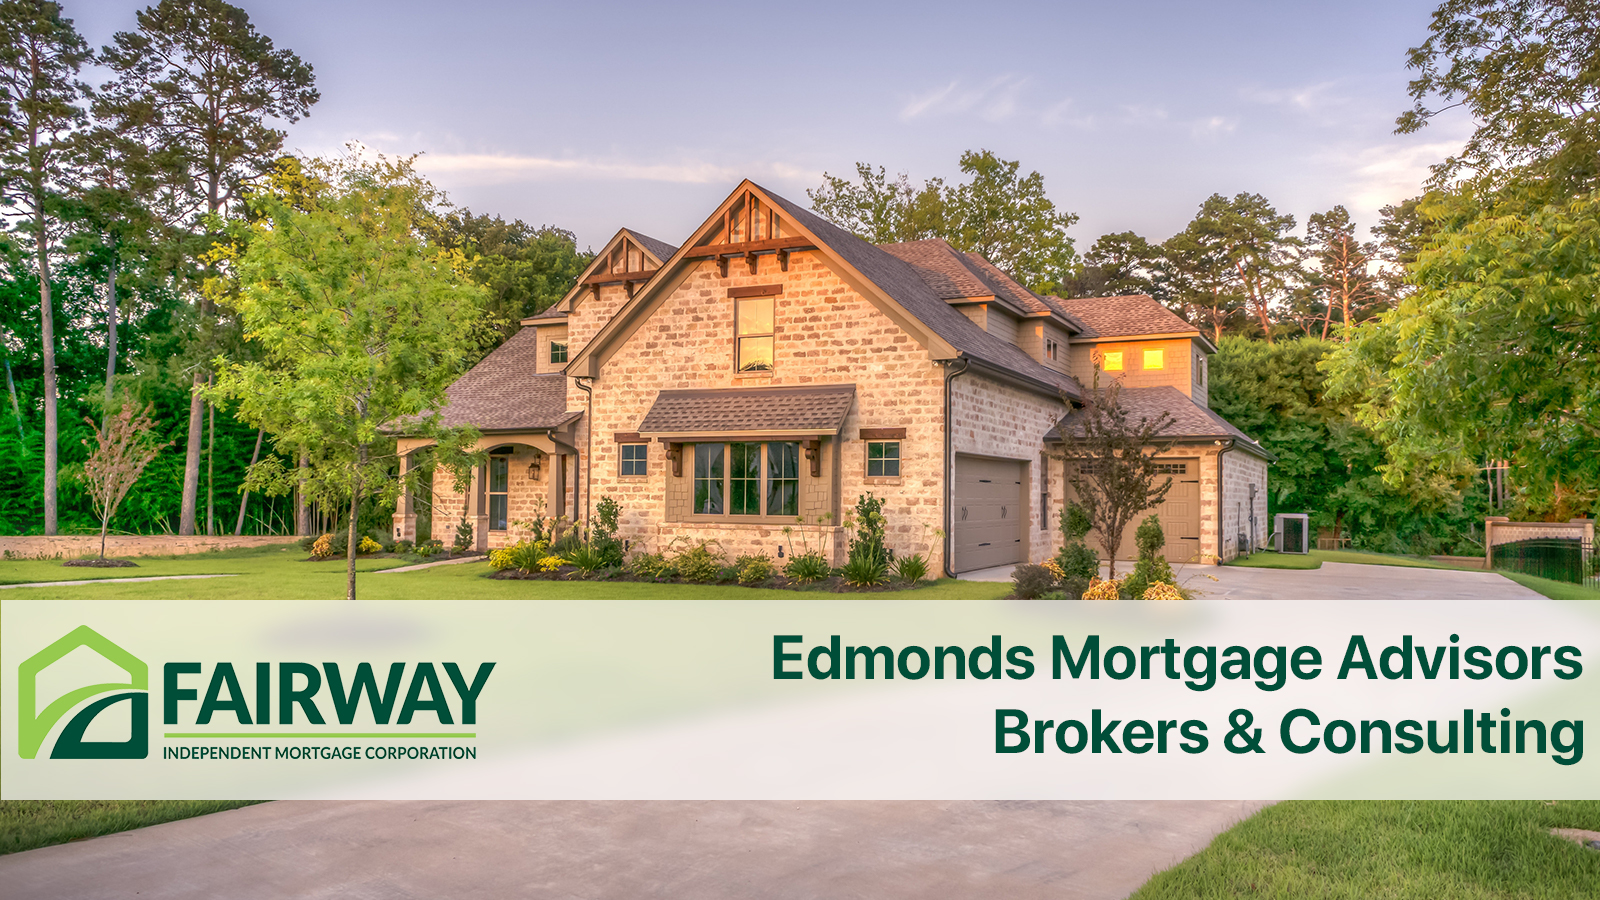 Edmonds-Mortgage-Advisors-Brokers-Consulting